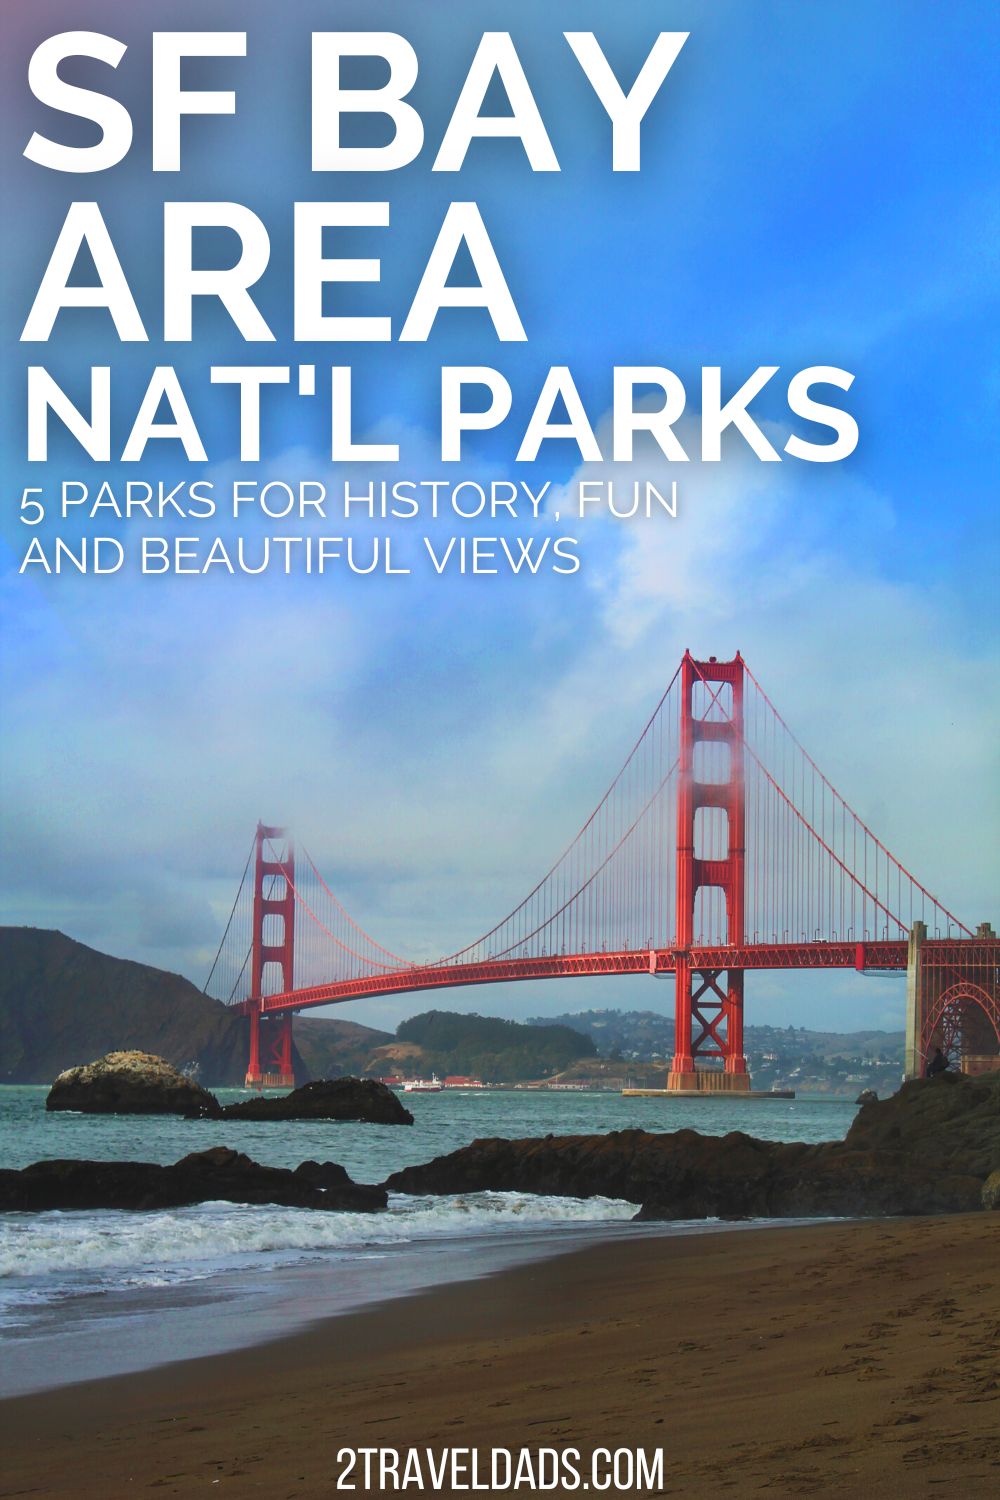 The San Francisco Bay Area National Parks sites include breathtaking nature, historic homes, famous WWII sites and more. Perfect for learning about the USA or just enjoying the Bay Area. Explore beaches, the Redwoods and more.